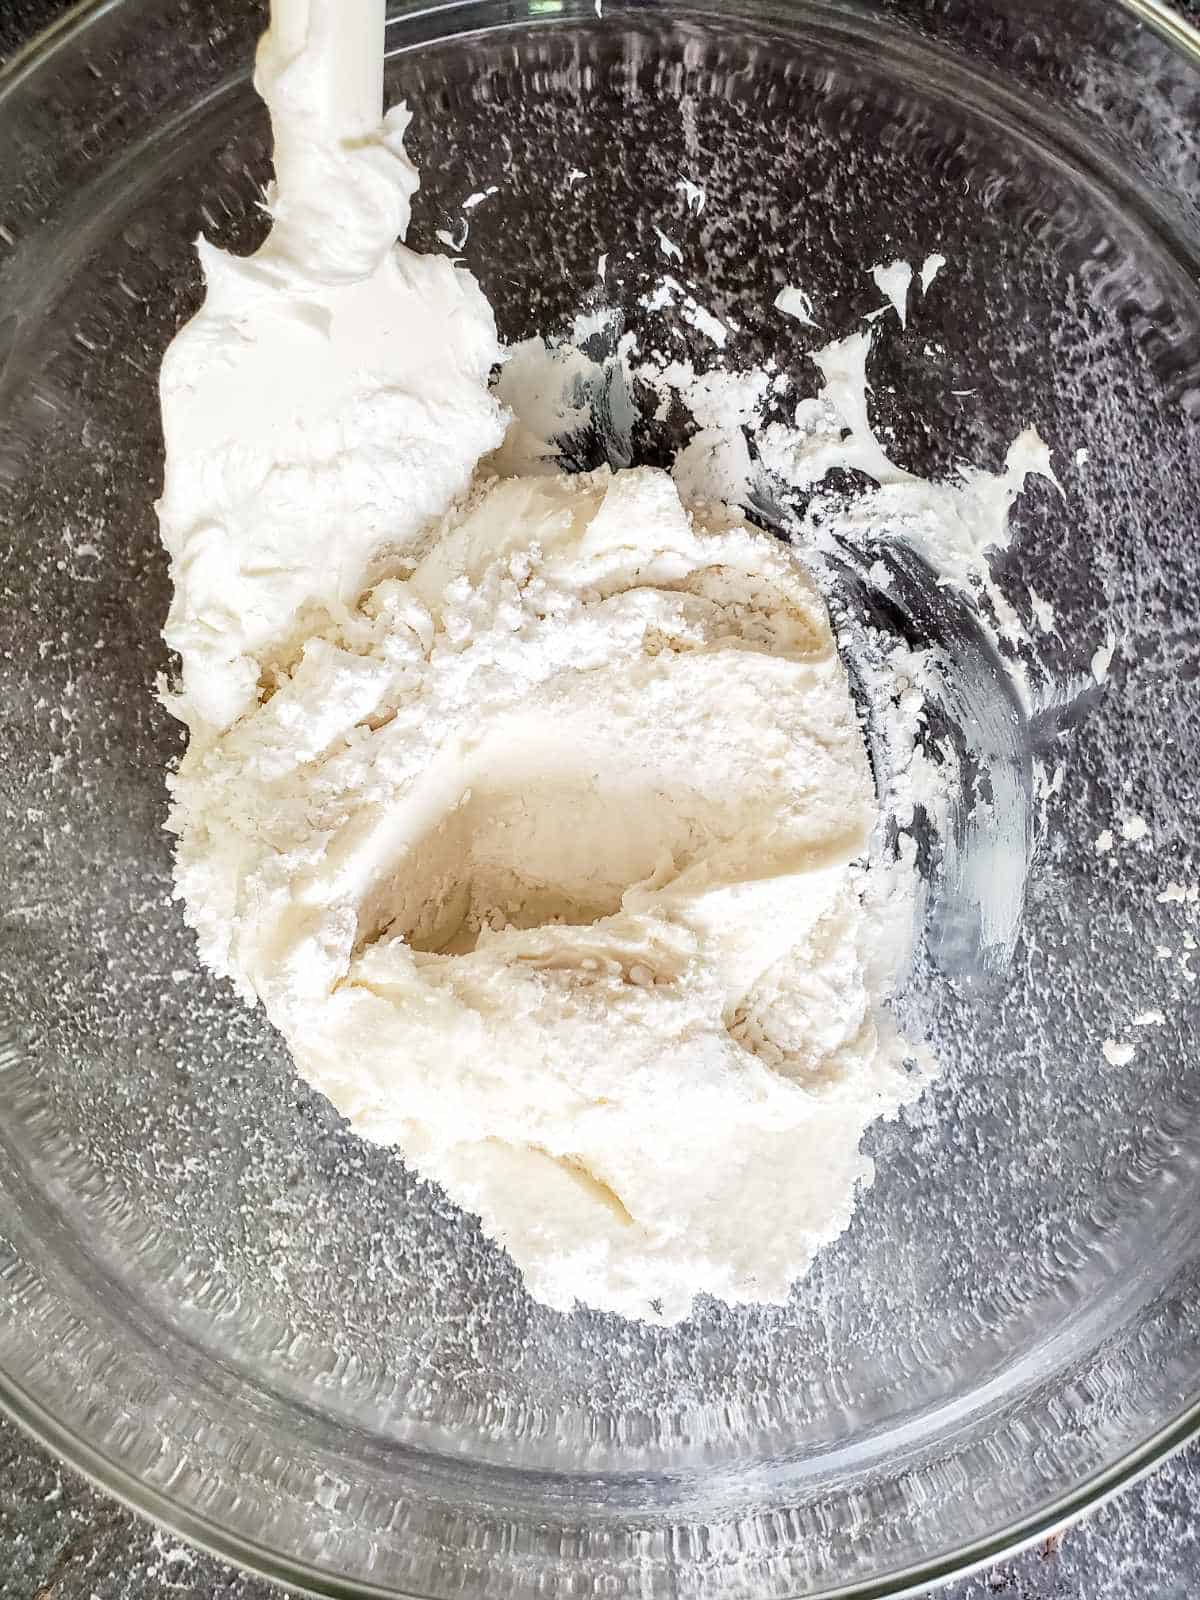 powdered sugar blended into bowl of store bought frosting.